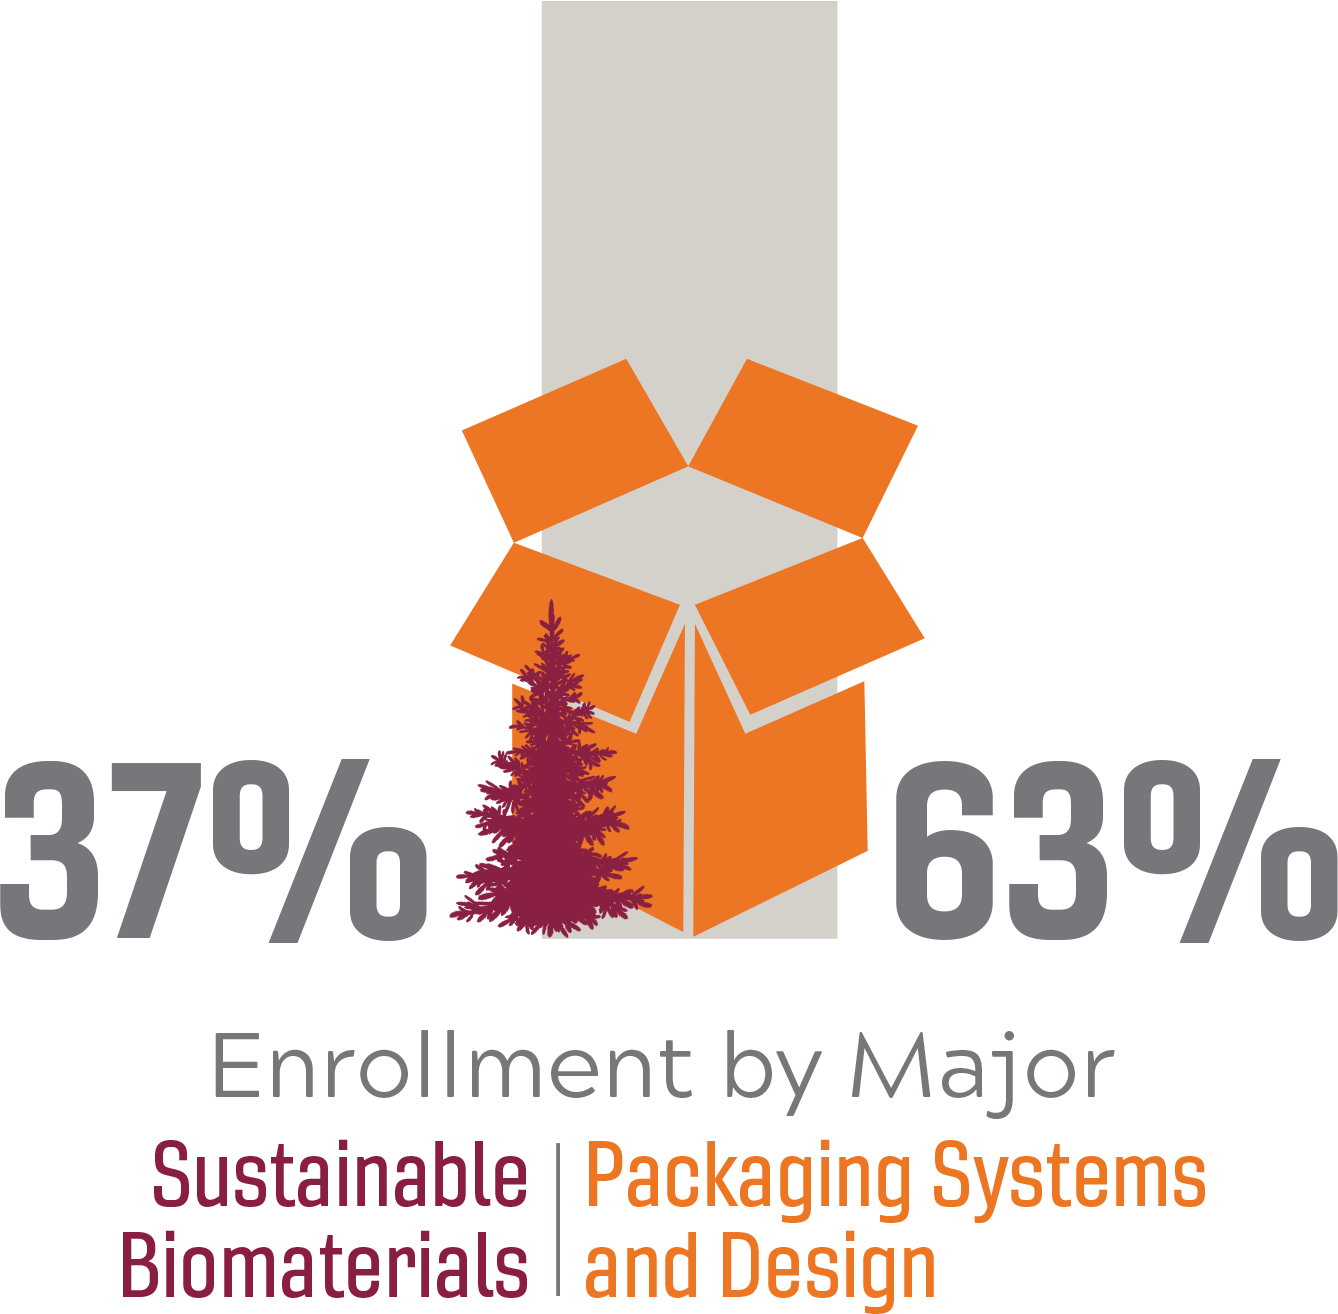 Enrollment by Major: 37% Sustainable Biomaterials, 63% Packaging Systems and Design.